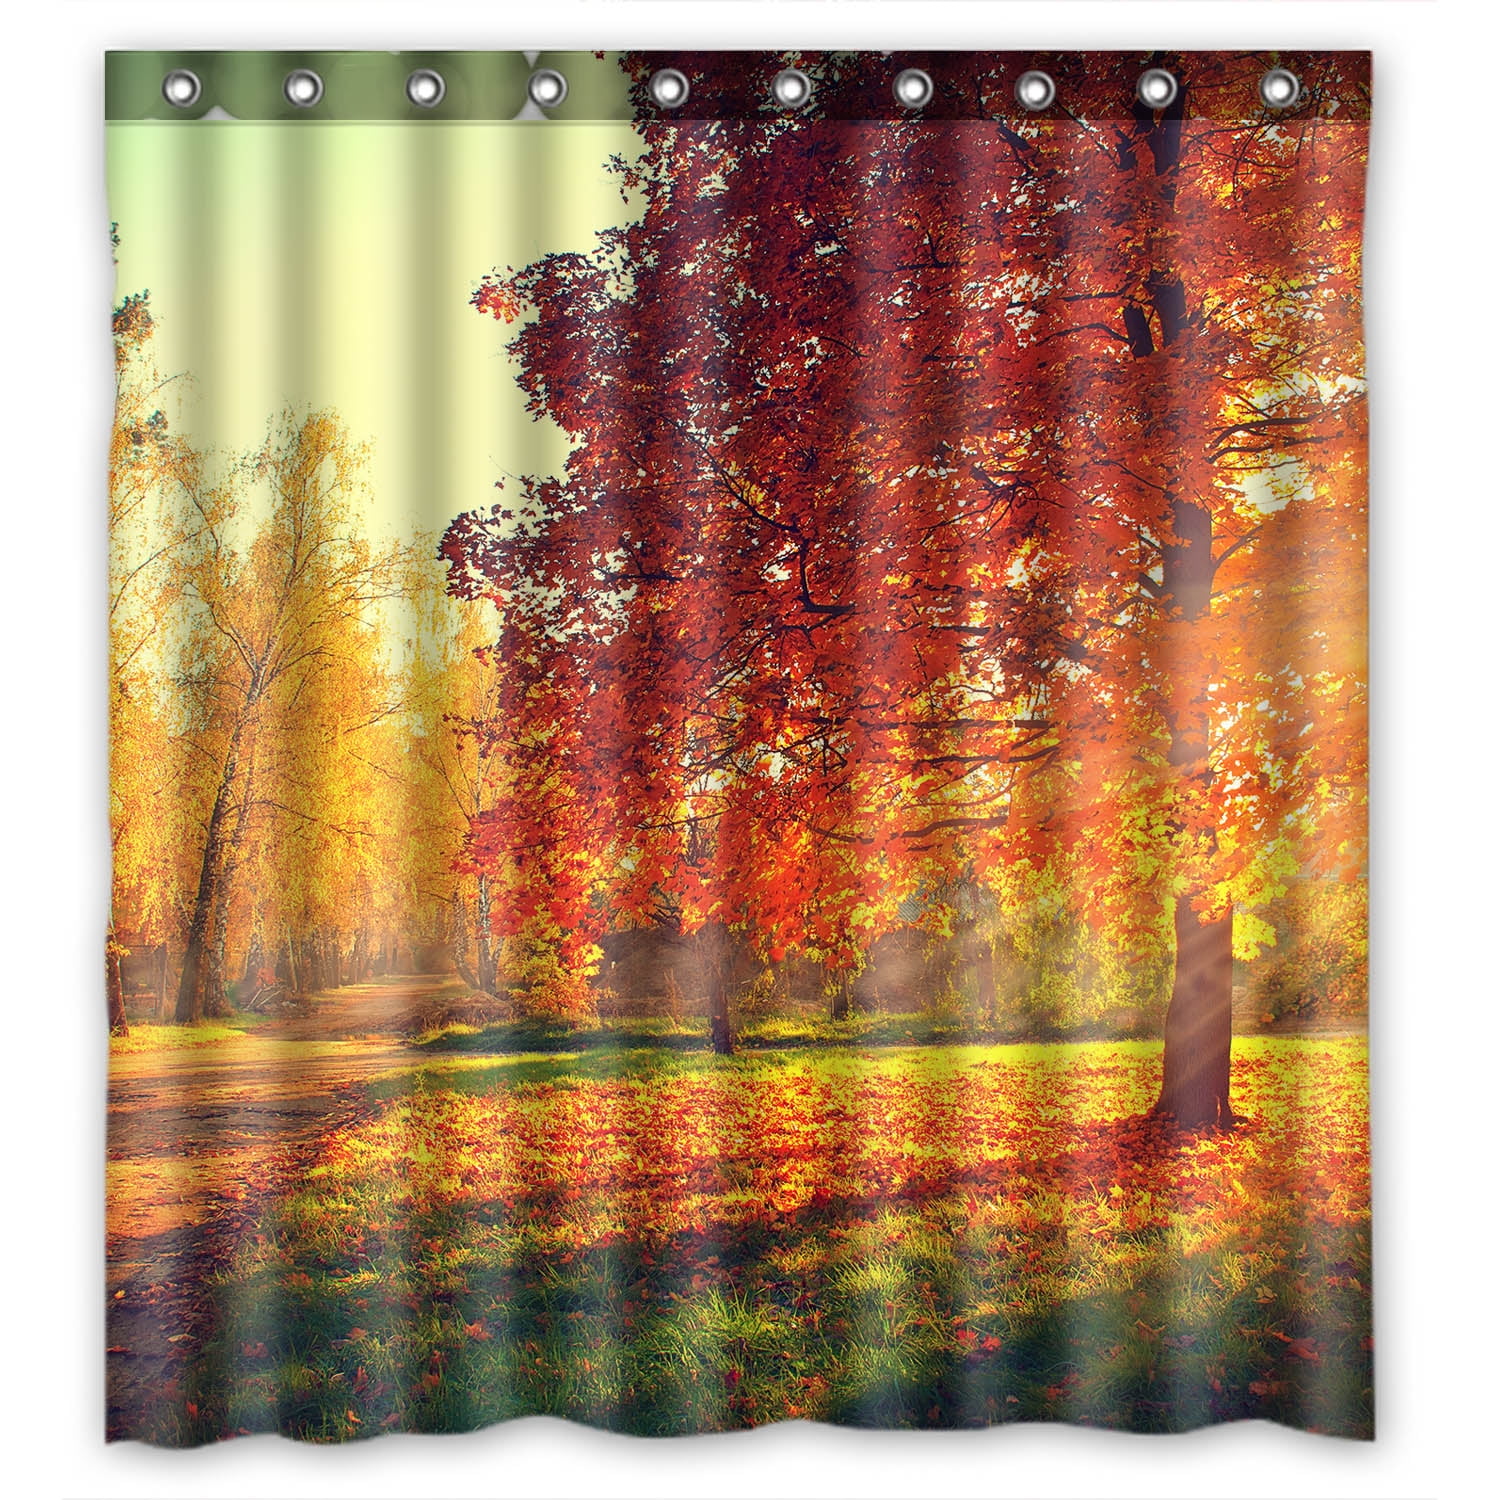 YKCG Autumn Park Scene Fall Trees and Leaves Shower Curtain Waterproof ...